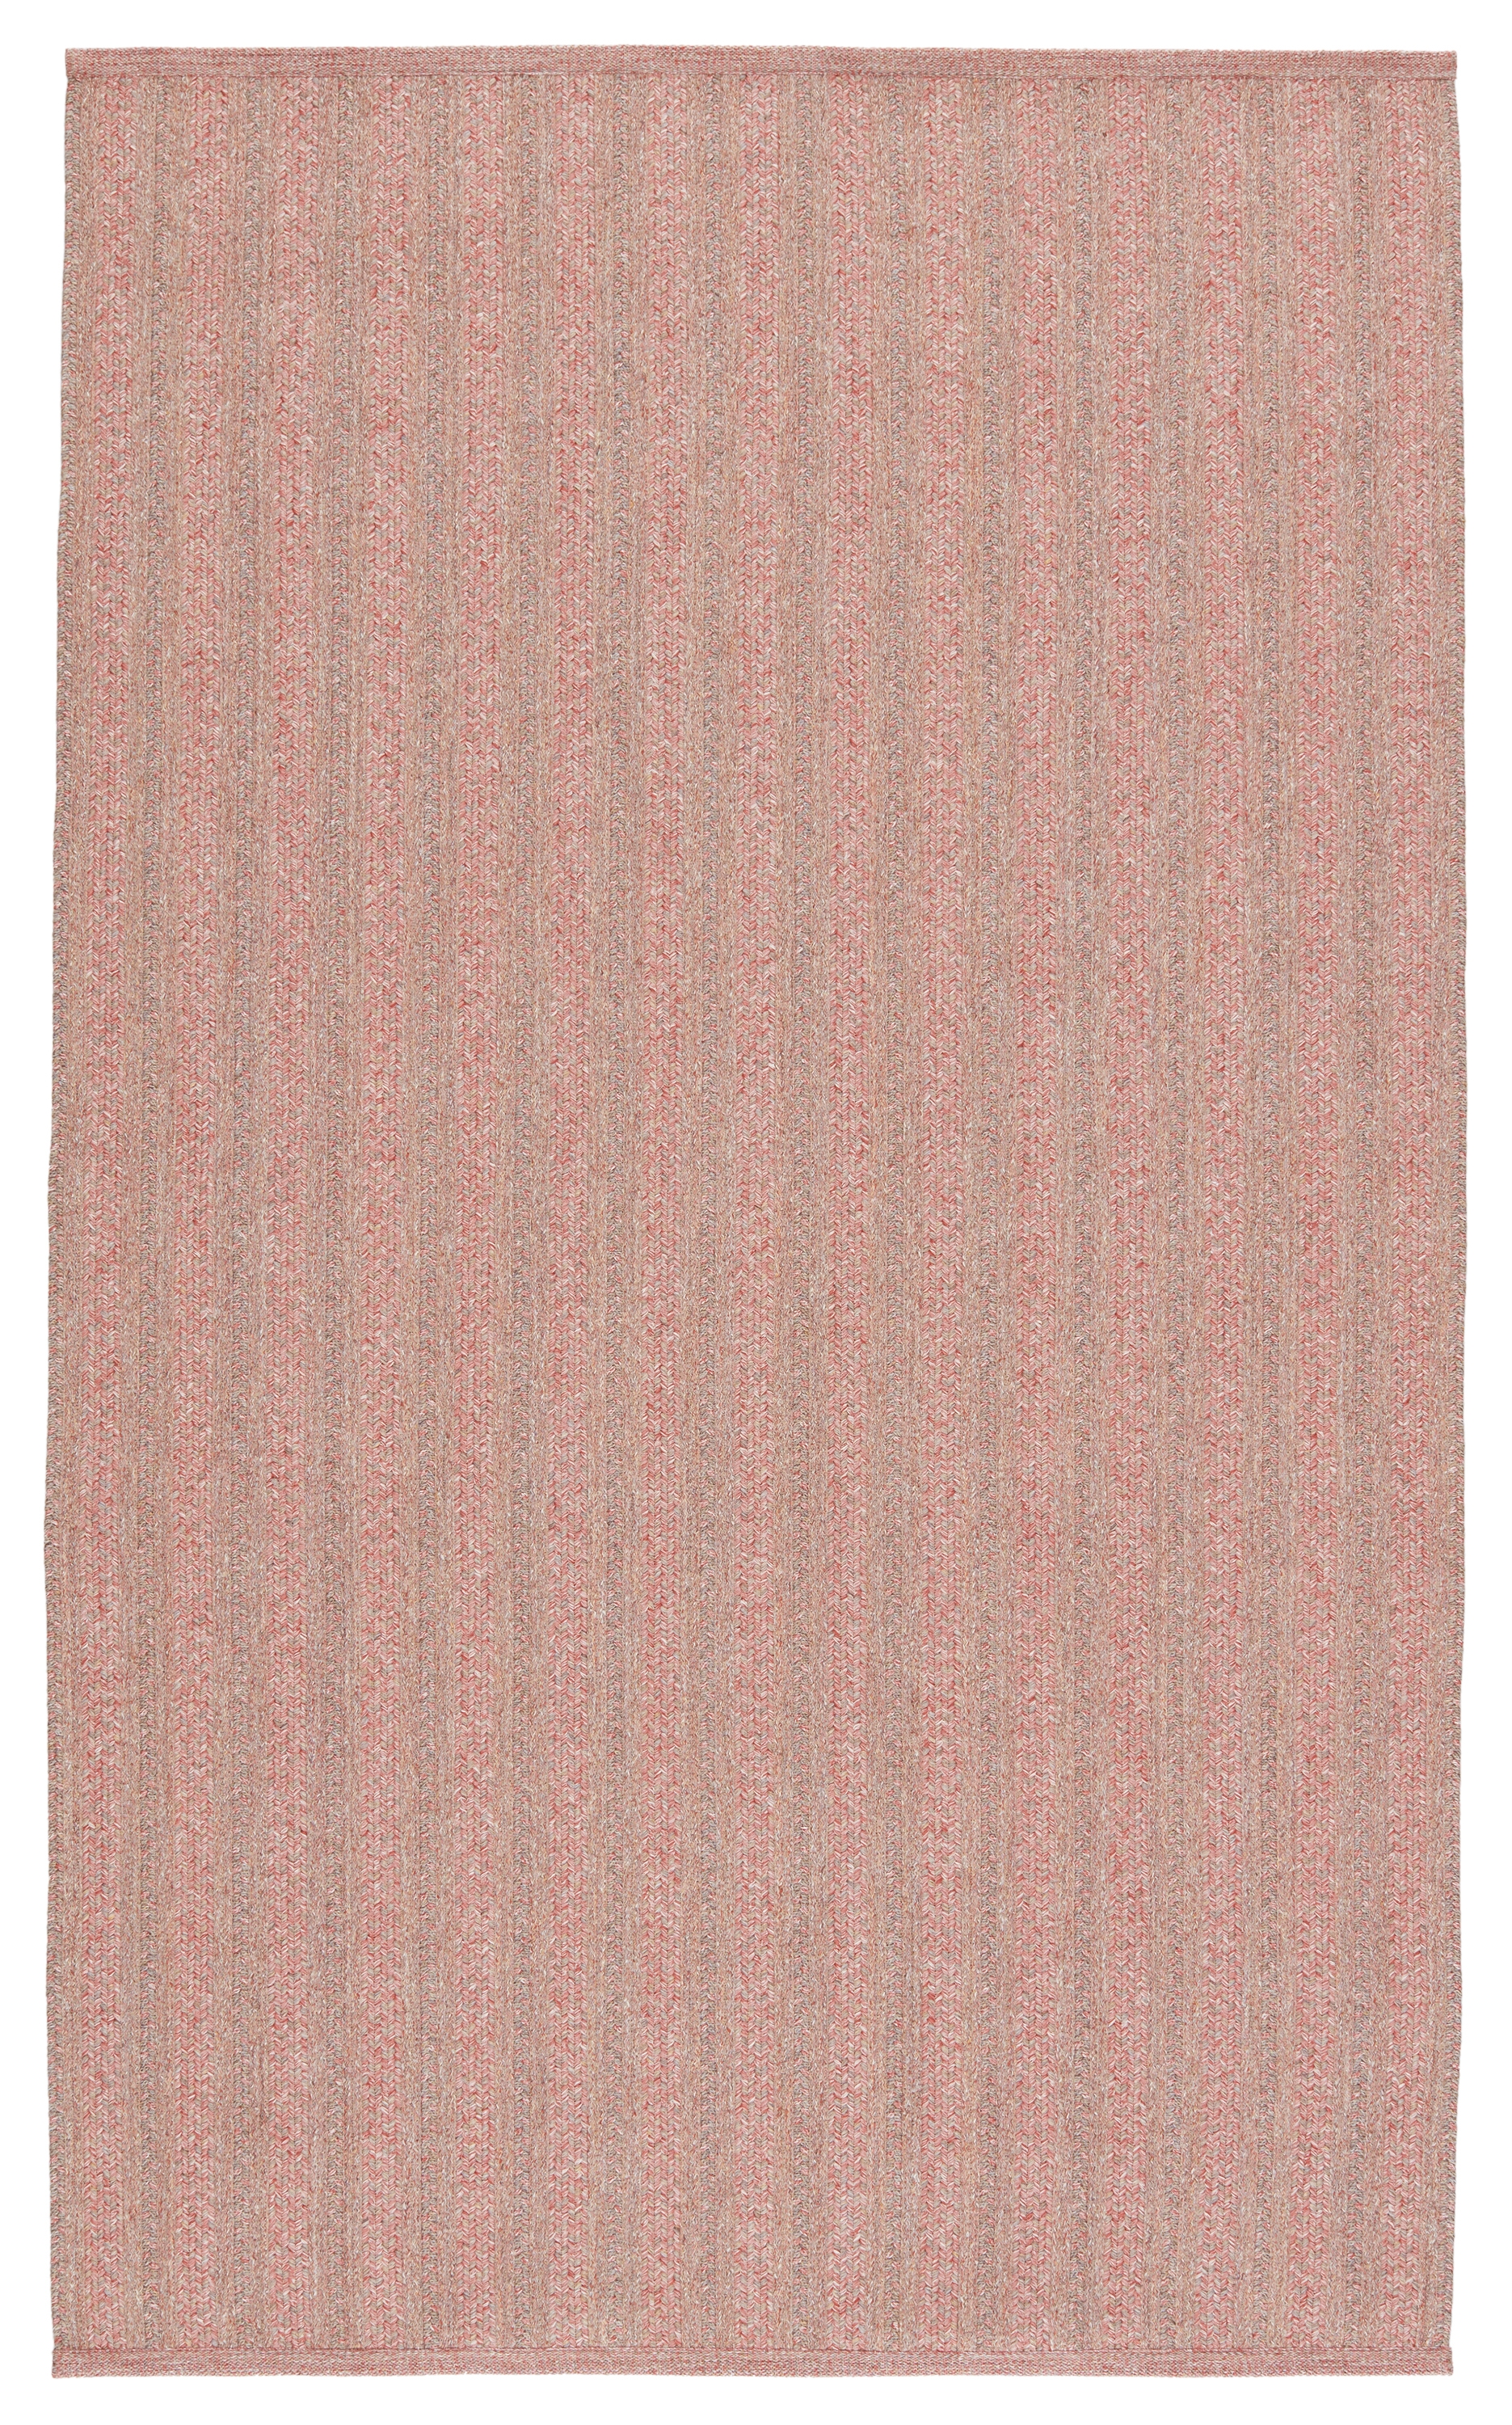 Topsail Indoor/ Outdoor Striped Rose/ Taupe Area Rug (4'X6') - Image 0